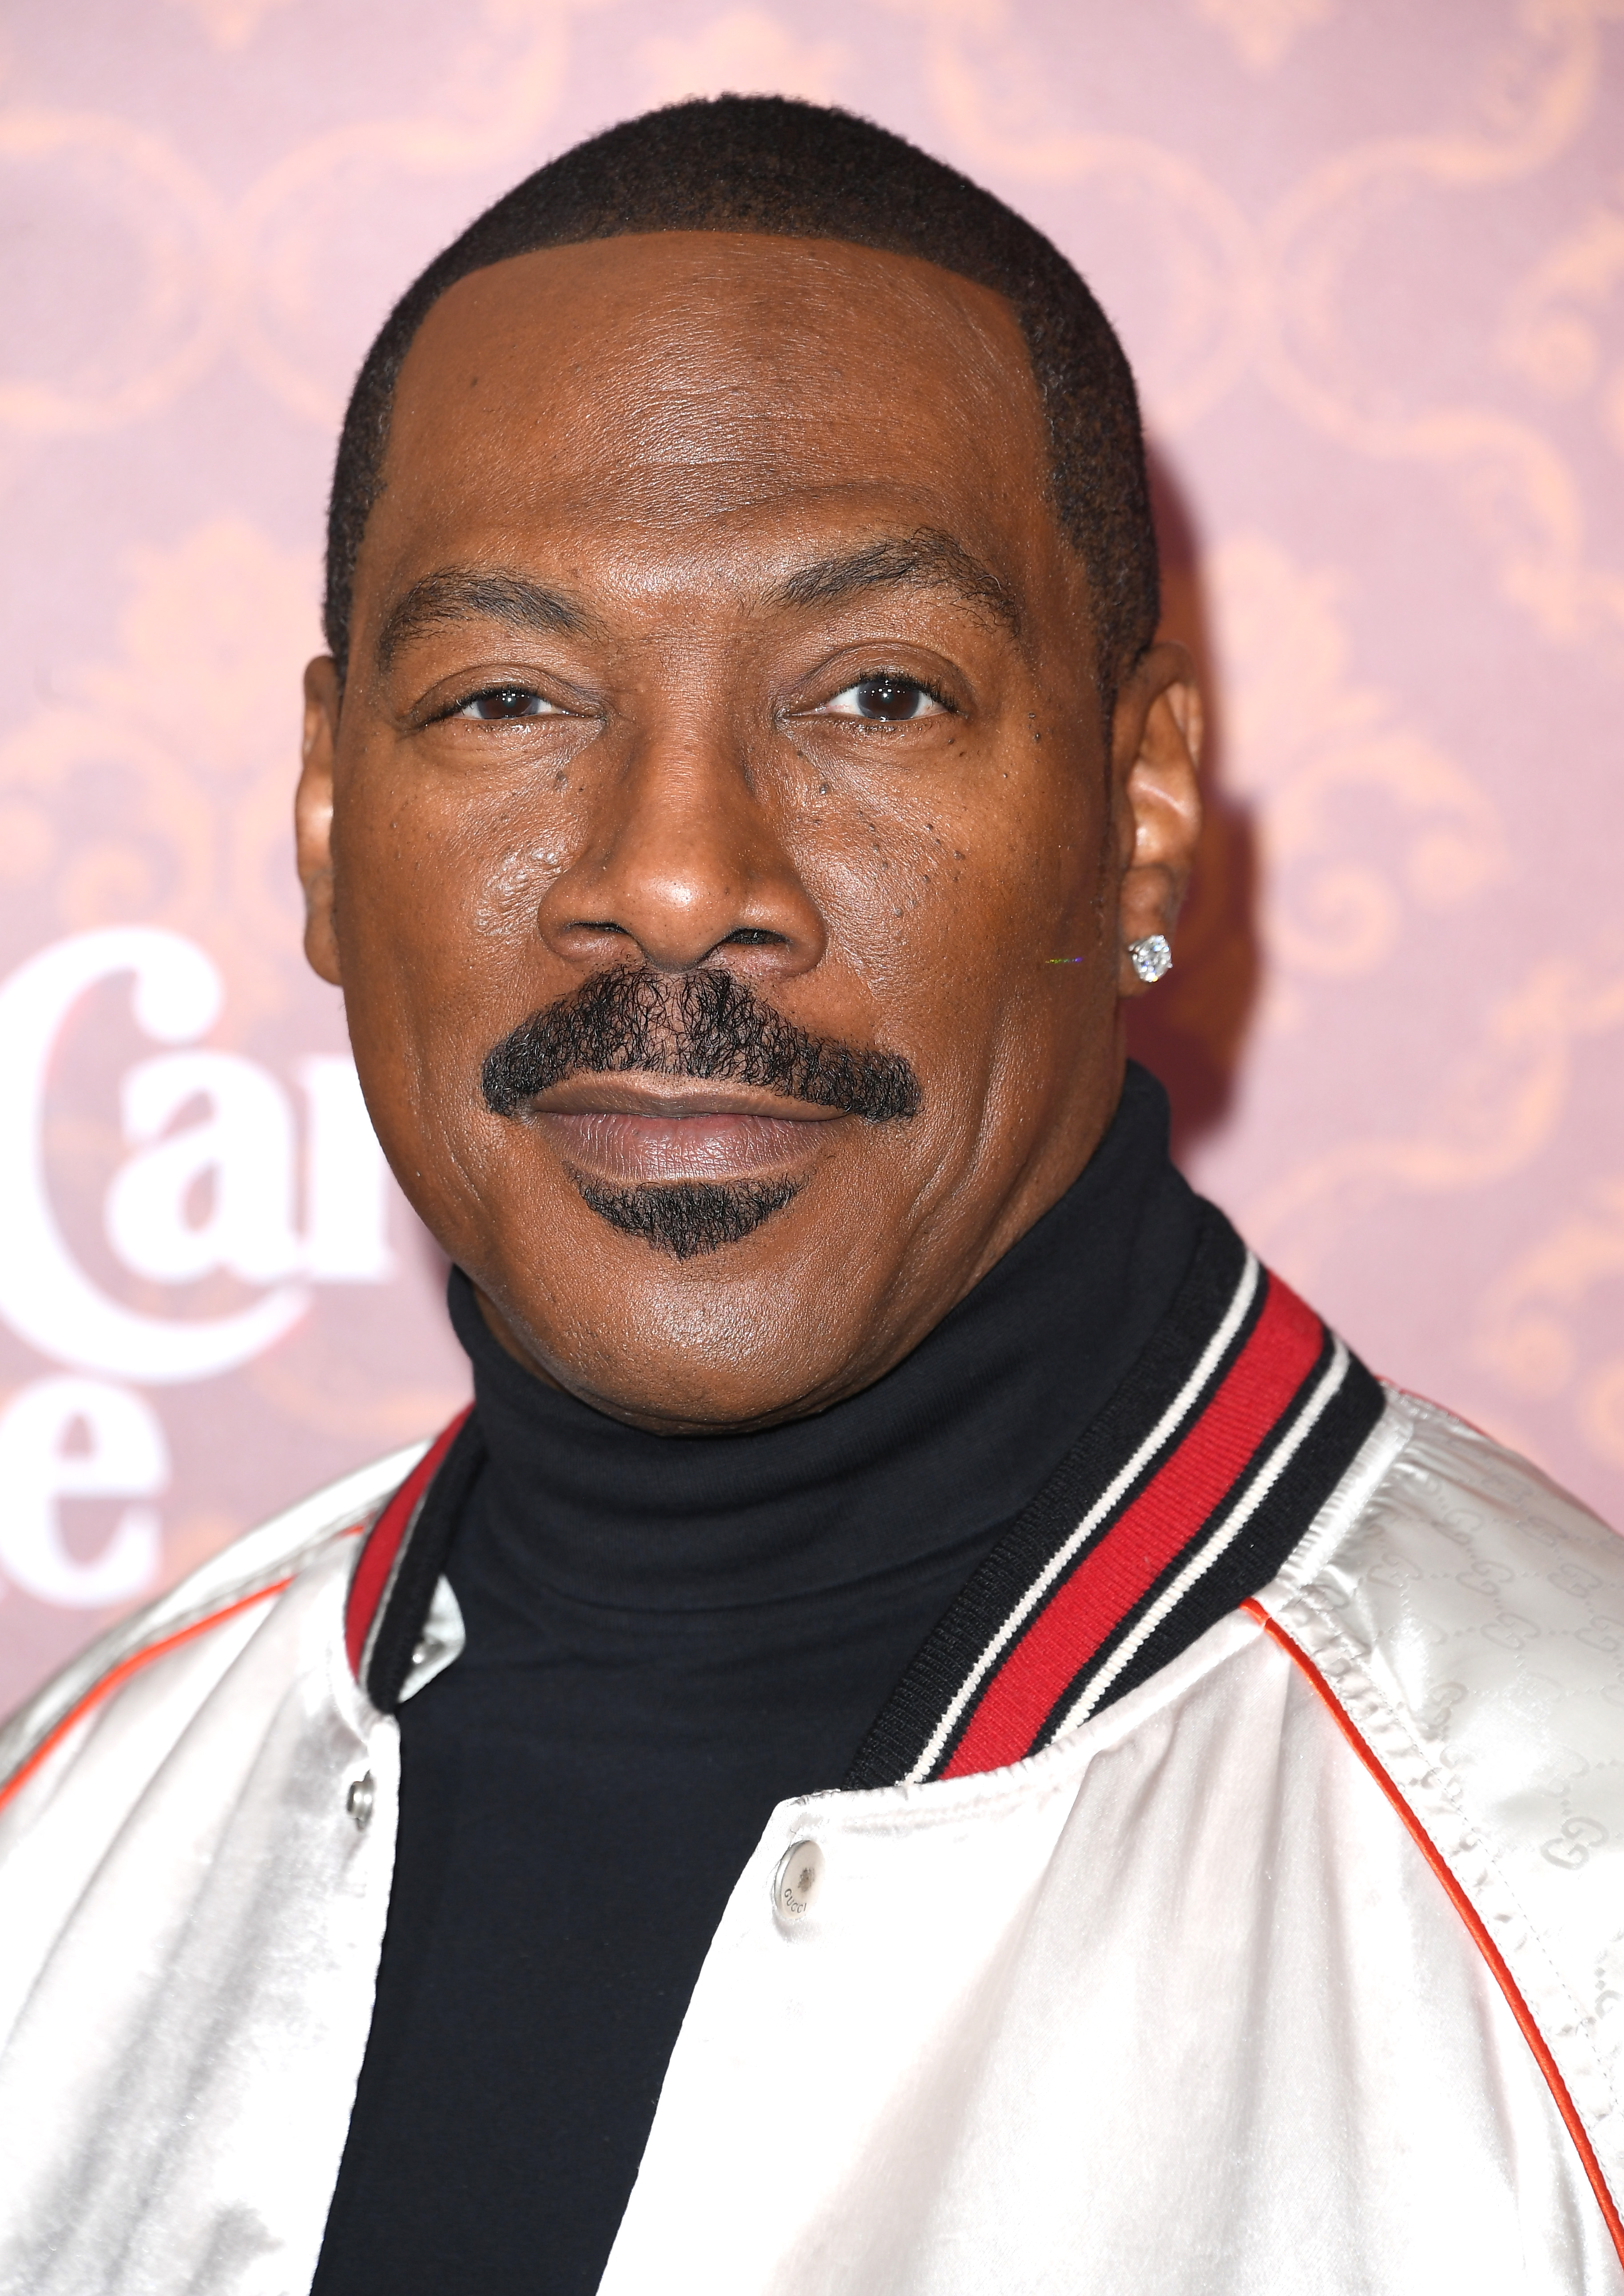 Eddie Murphy at the "Candy Cane Lane" premier in Los Angeles in 2023 | Source: Getty Images